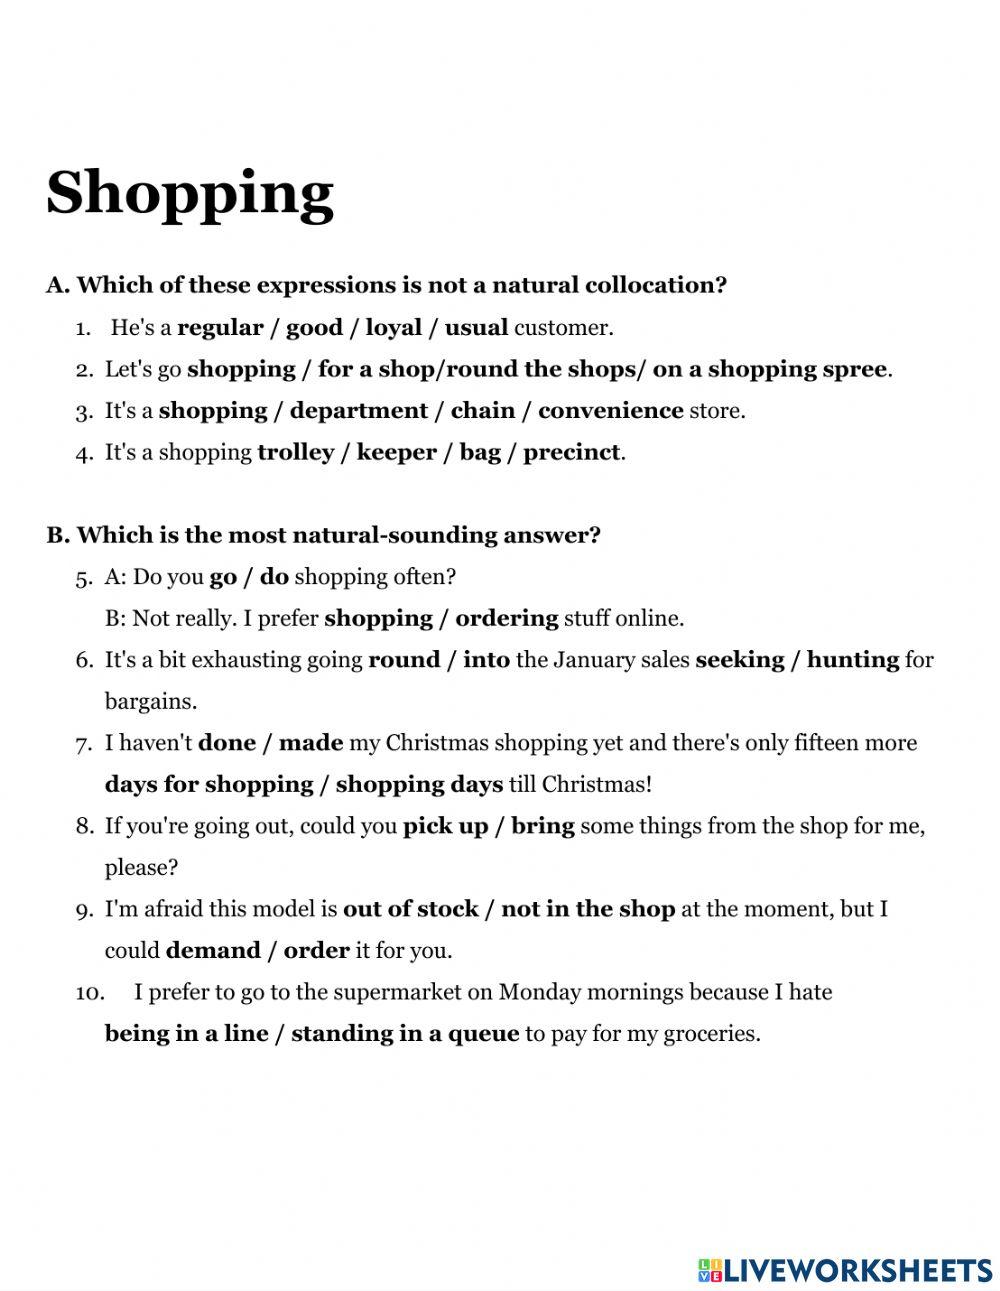 Shopping collocations